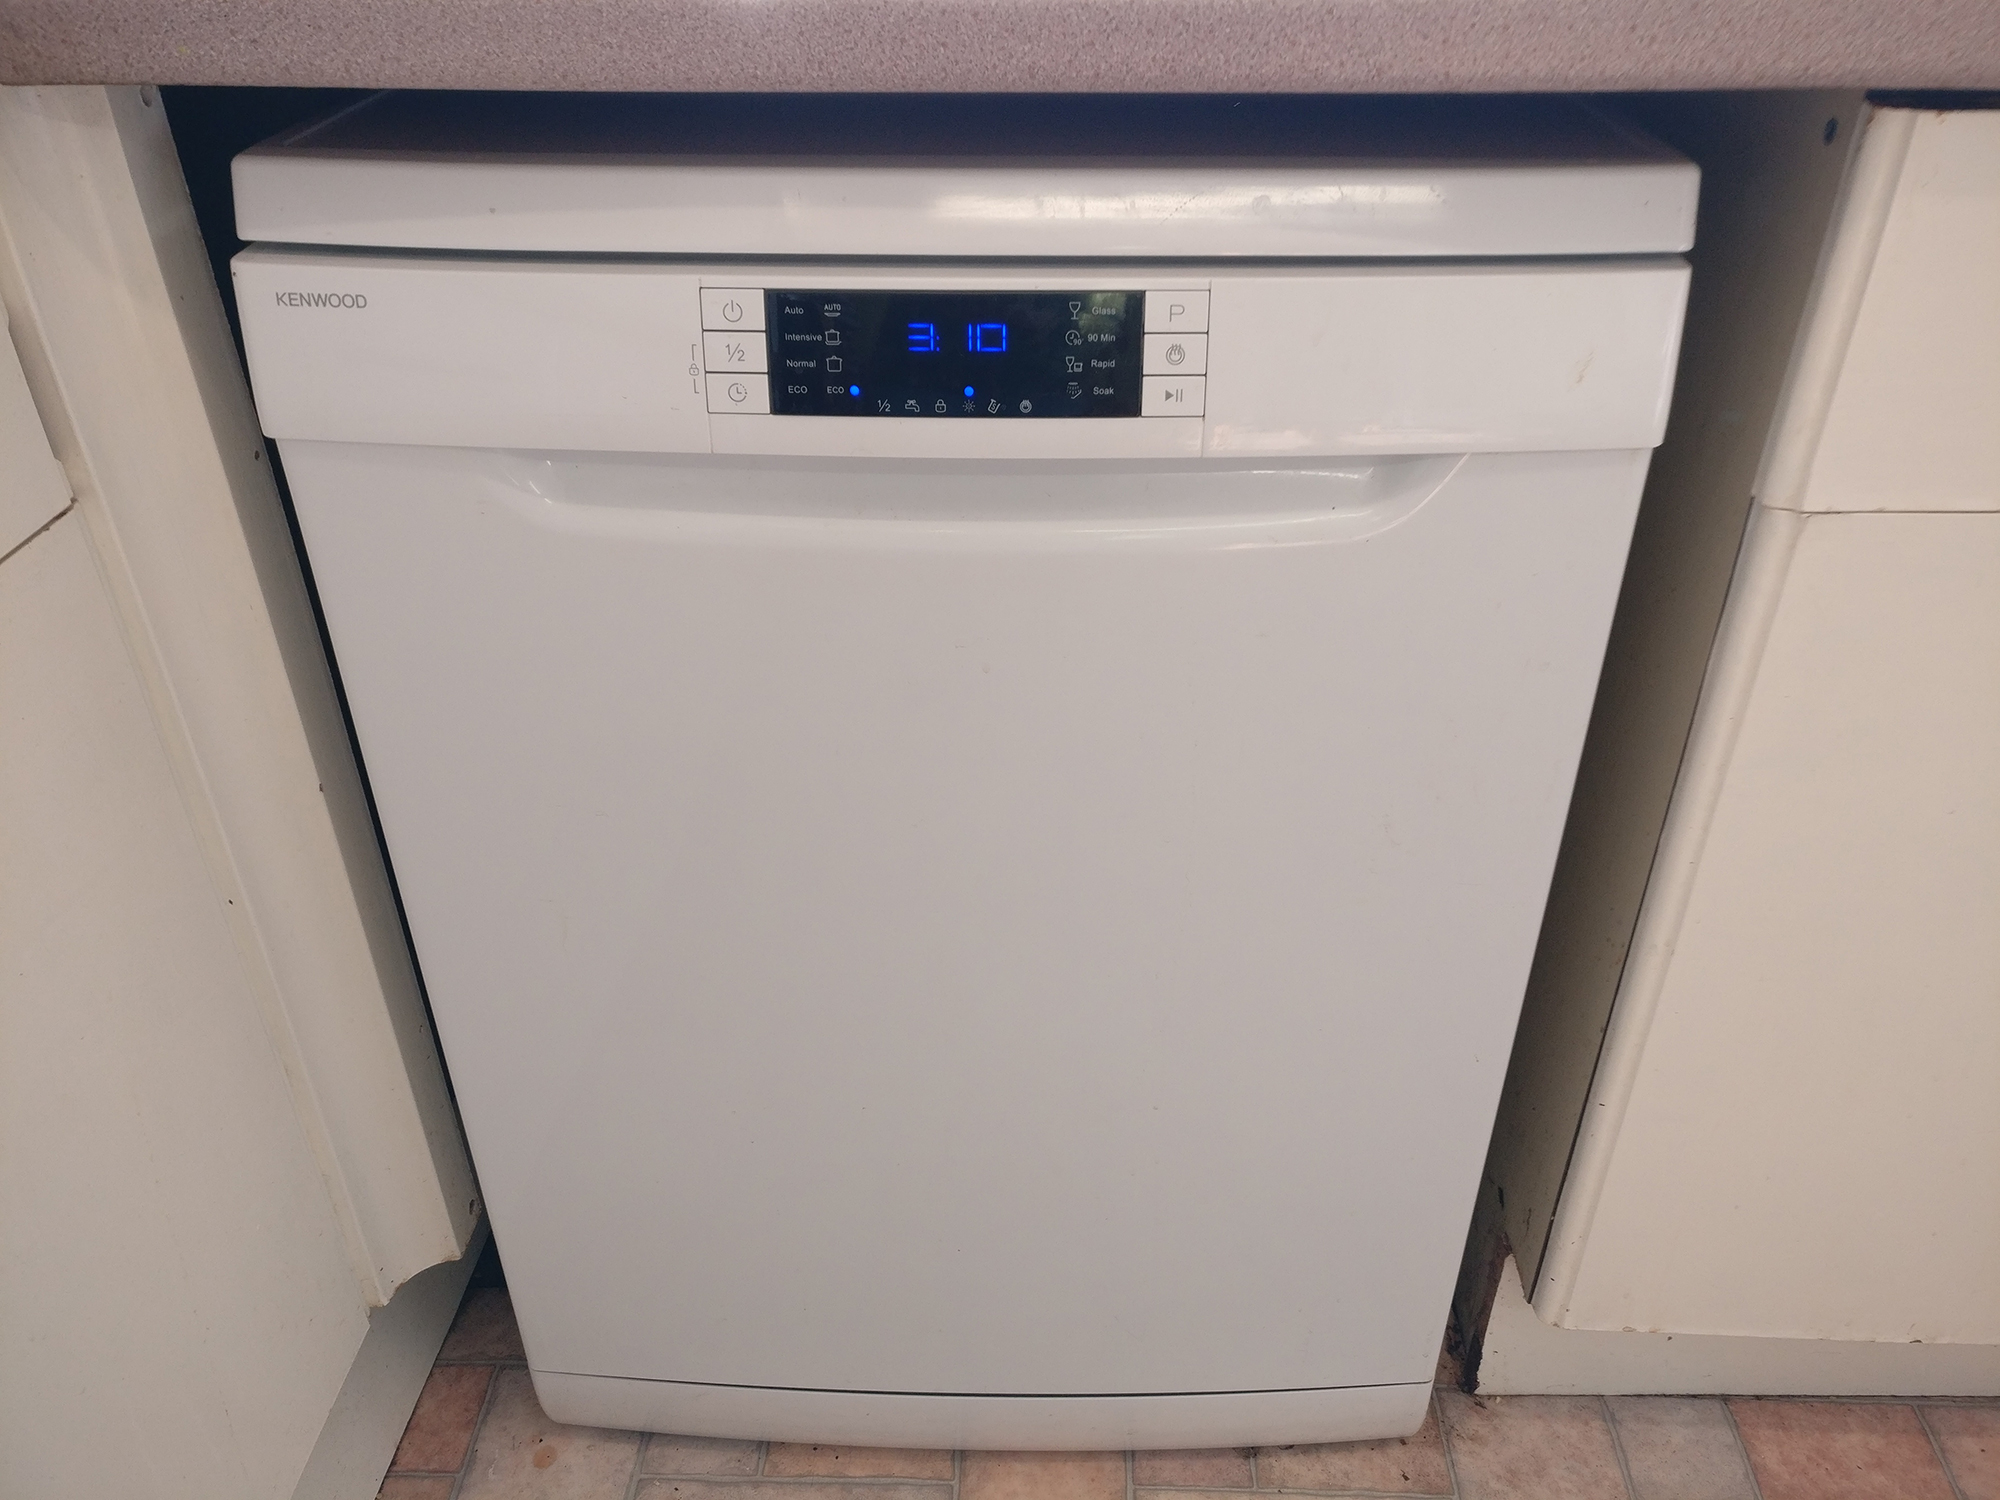 second hand dishwasher prices